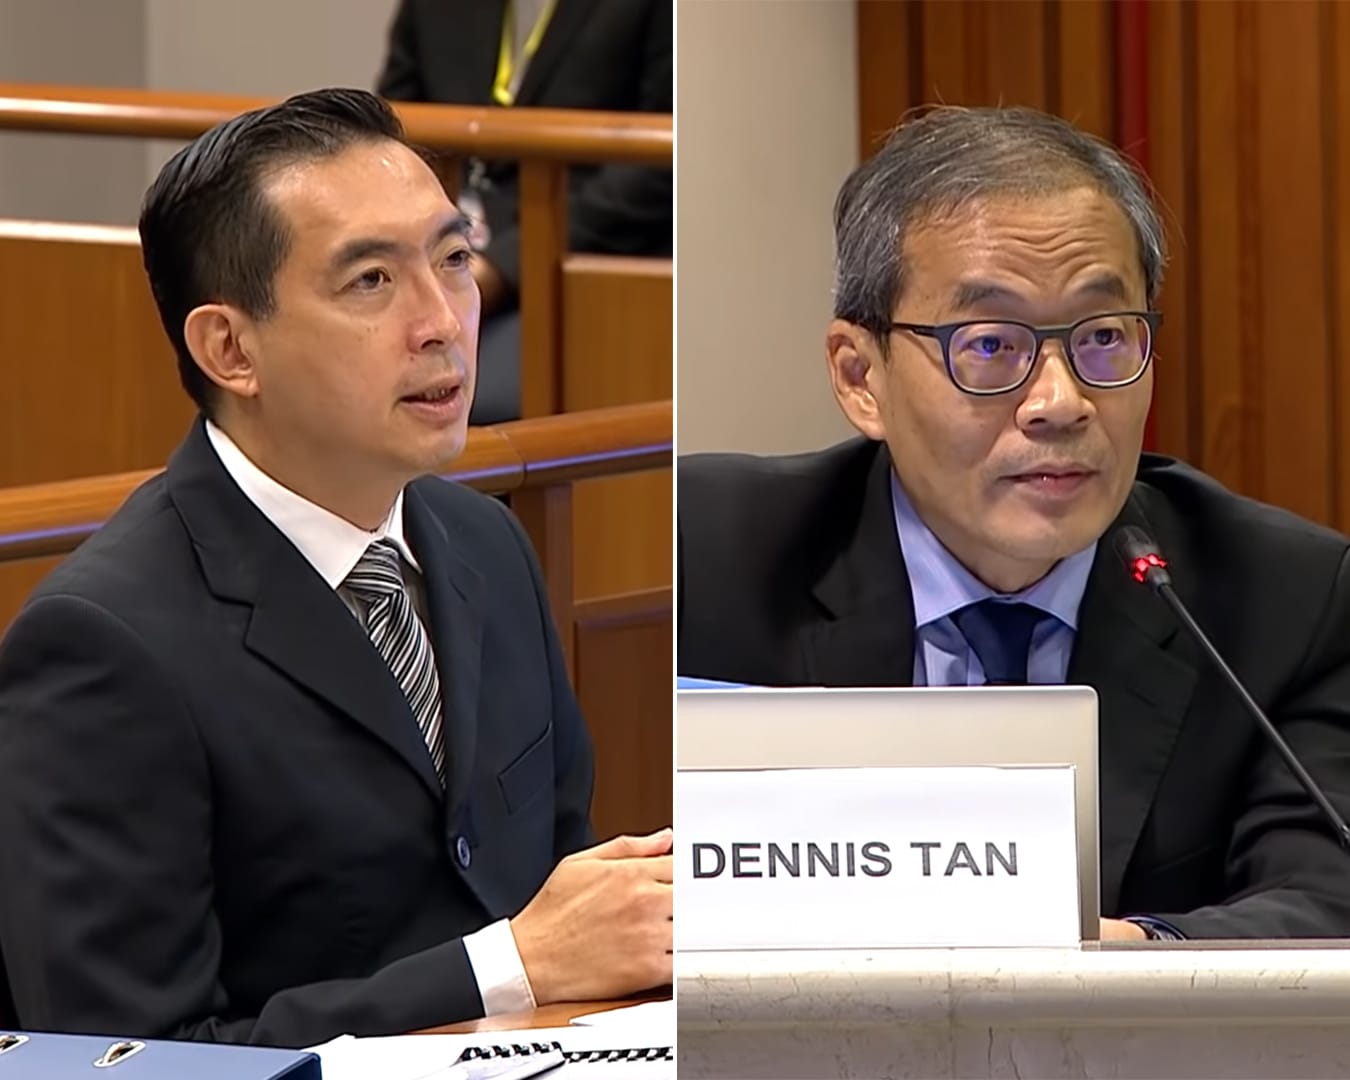 Privileges committee hearing: WP's Dennis Tan asks expert if Raeesah Khan's sexual assault trauma led her to lie